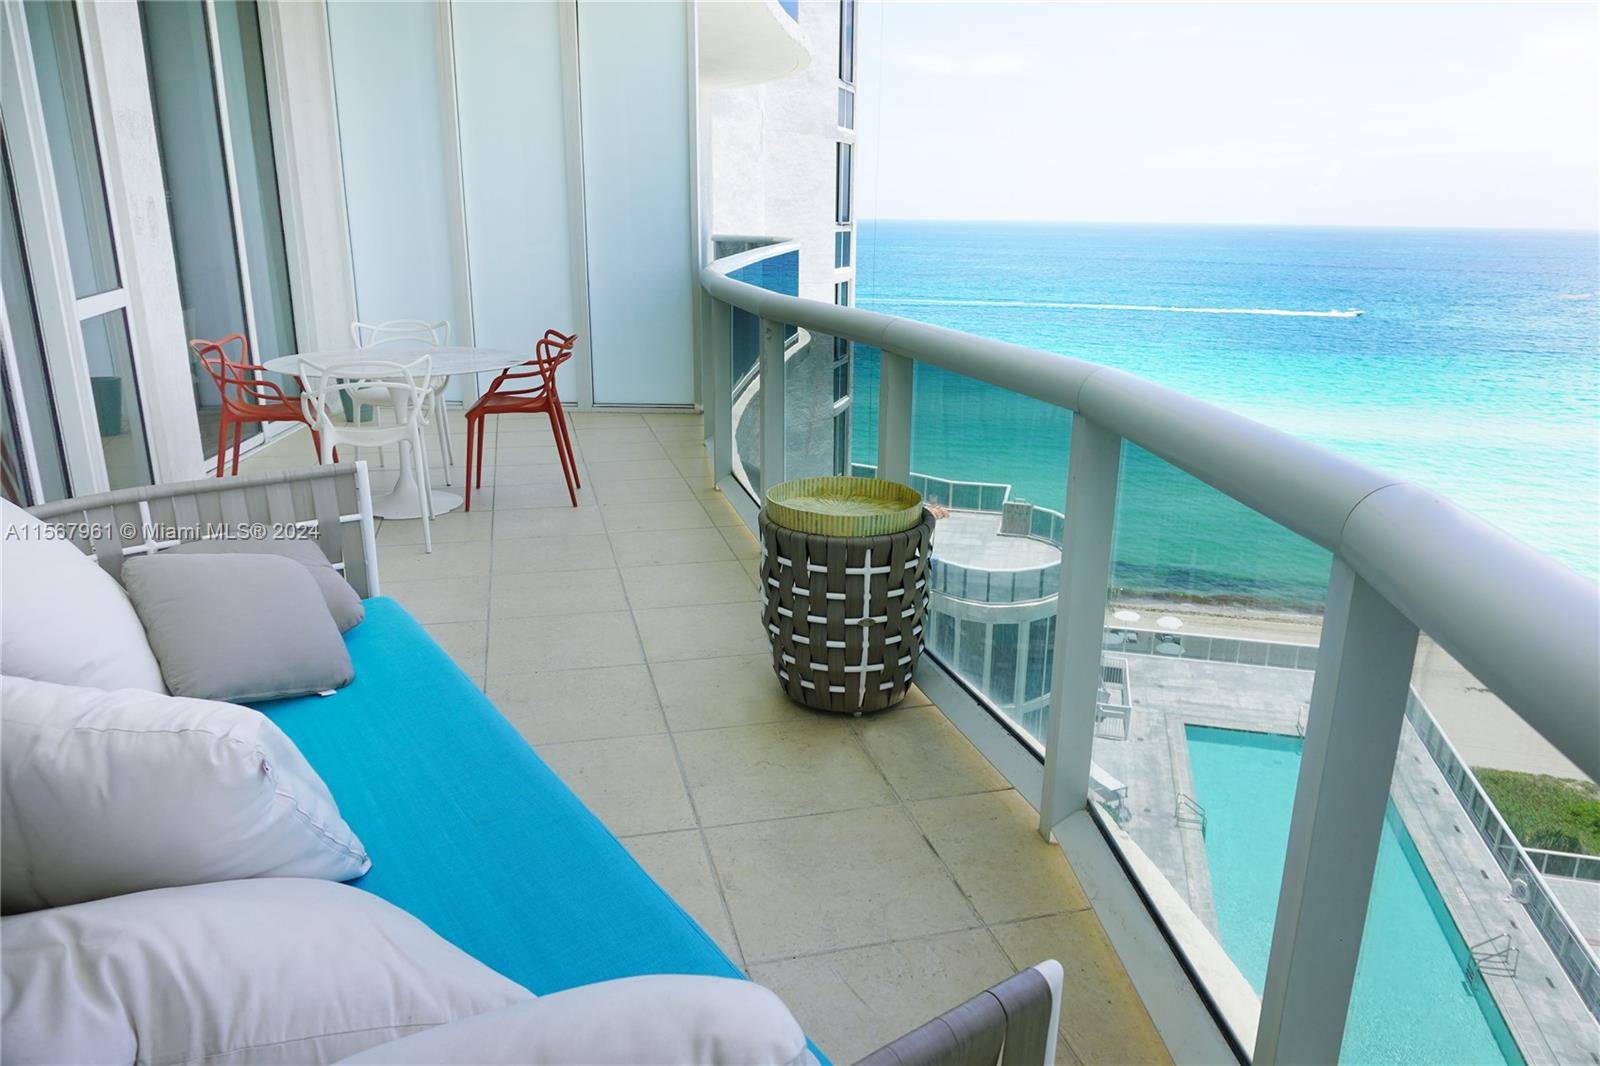 OCEANFRONT FULLY FURNISHED 2 BED DEN 3 BATH CONDO IN A LUXURY TRUMP TOWER WITH 5 STAR AMENITIES.